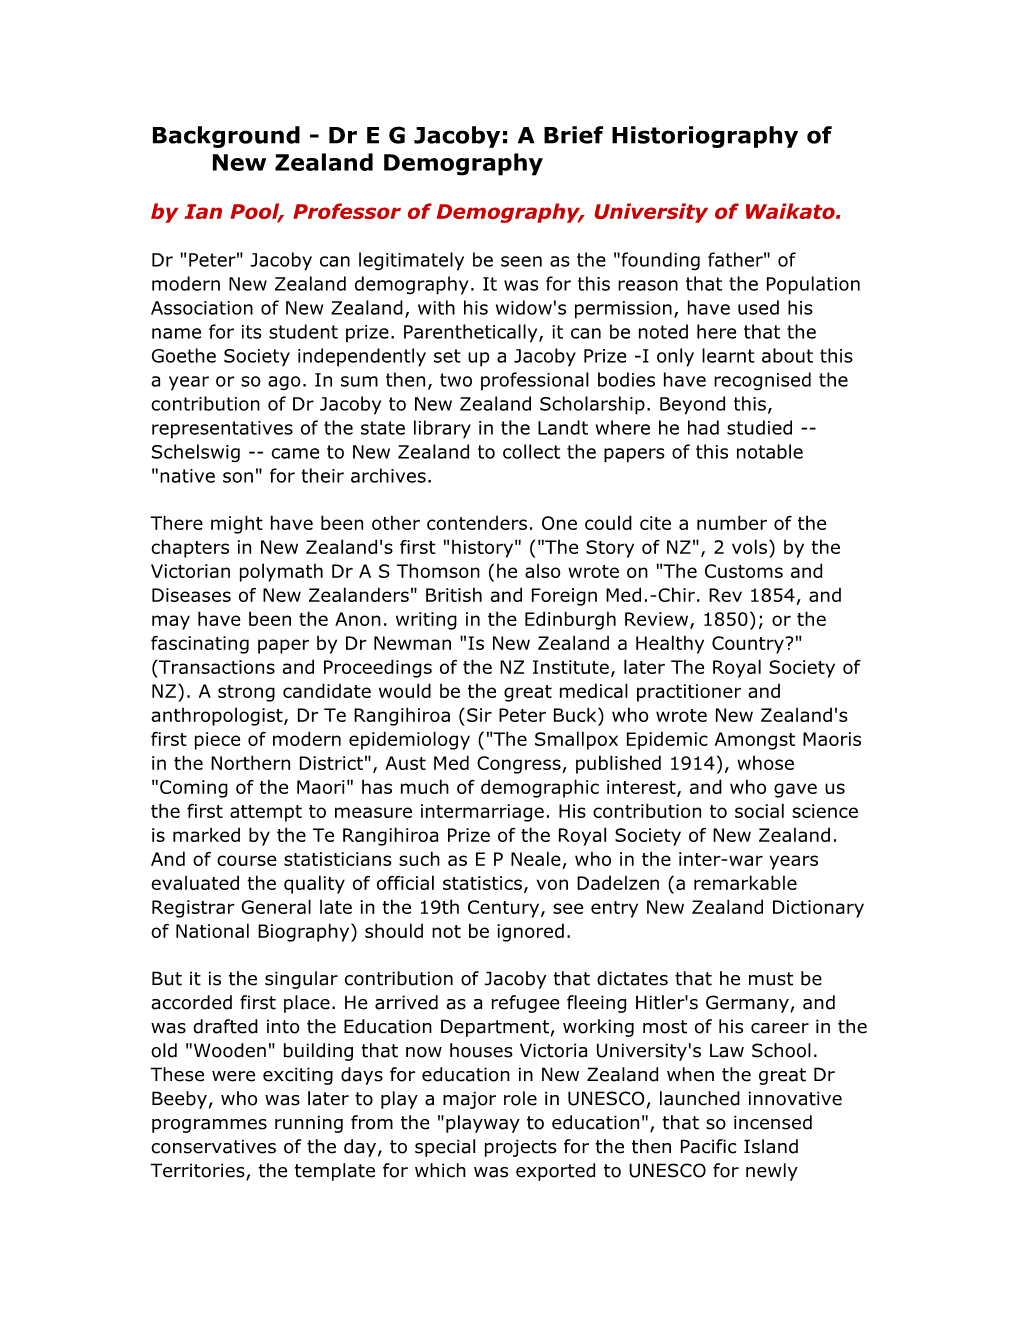 Background - Dr E G Jacoby: a Brief Historiography of New Zealand Demography